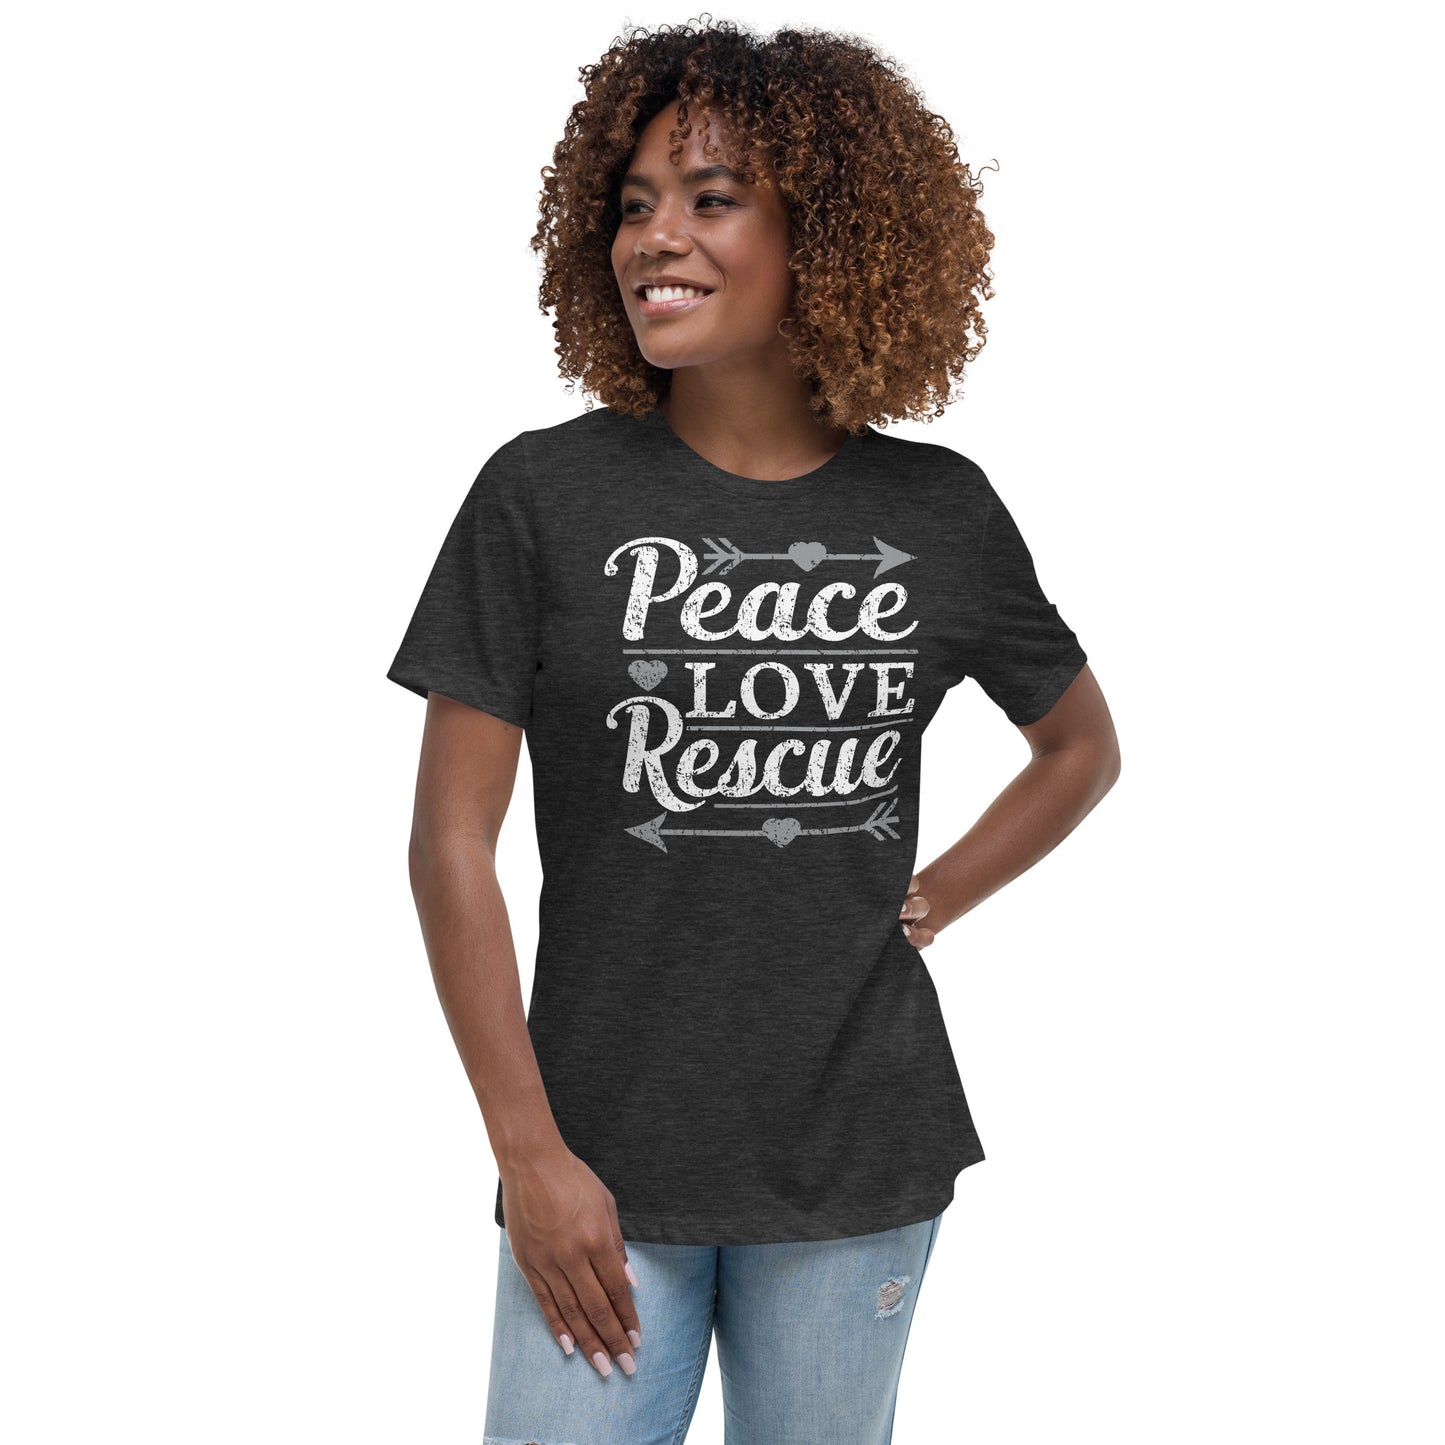 Peace love rescue women’s relaxed fit t-shirts by Dog Artistry dark grey color